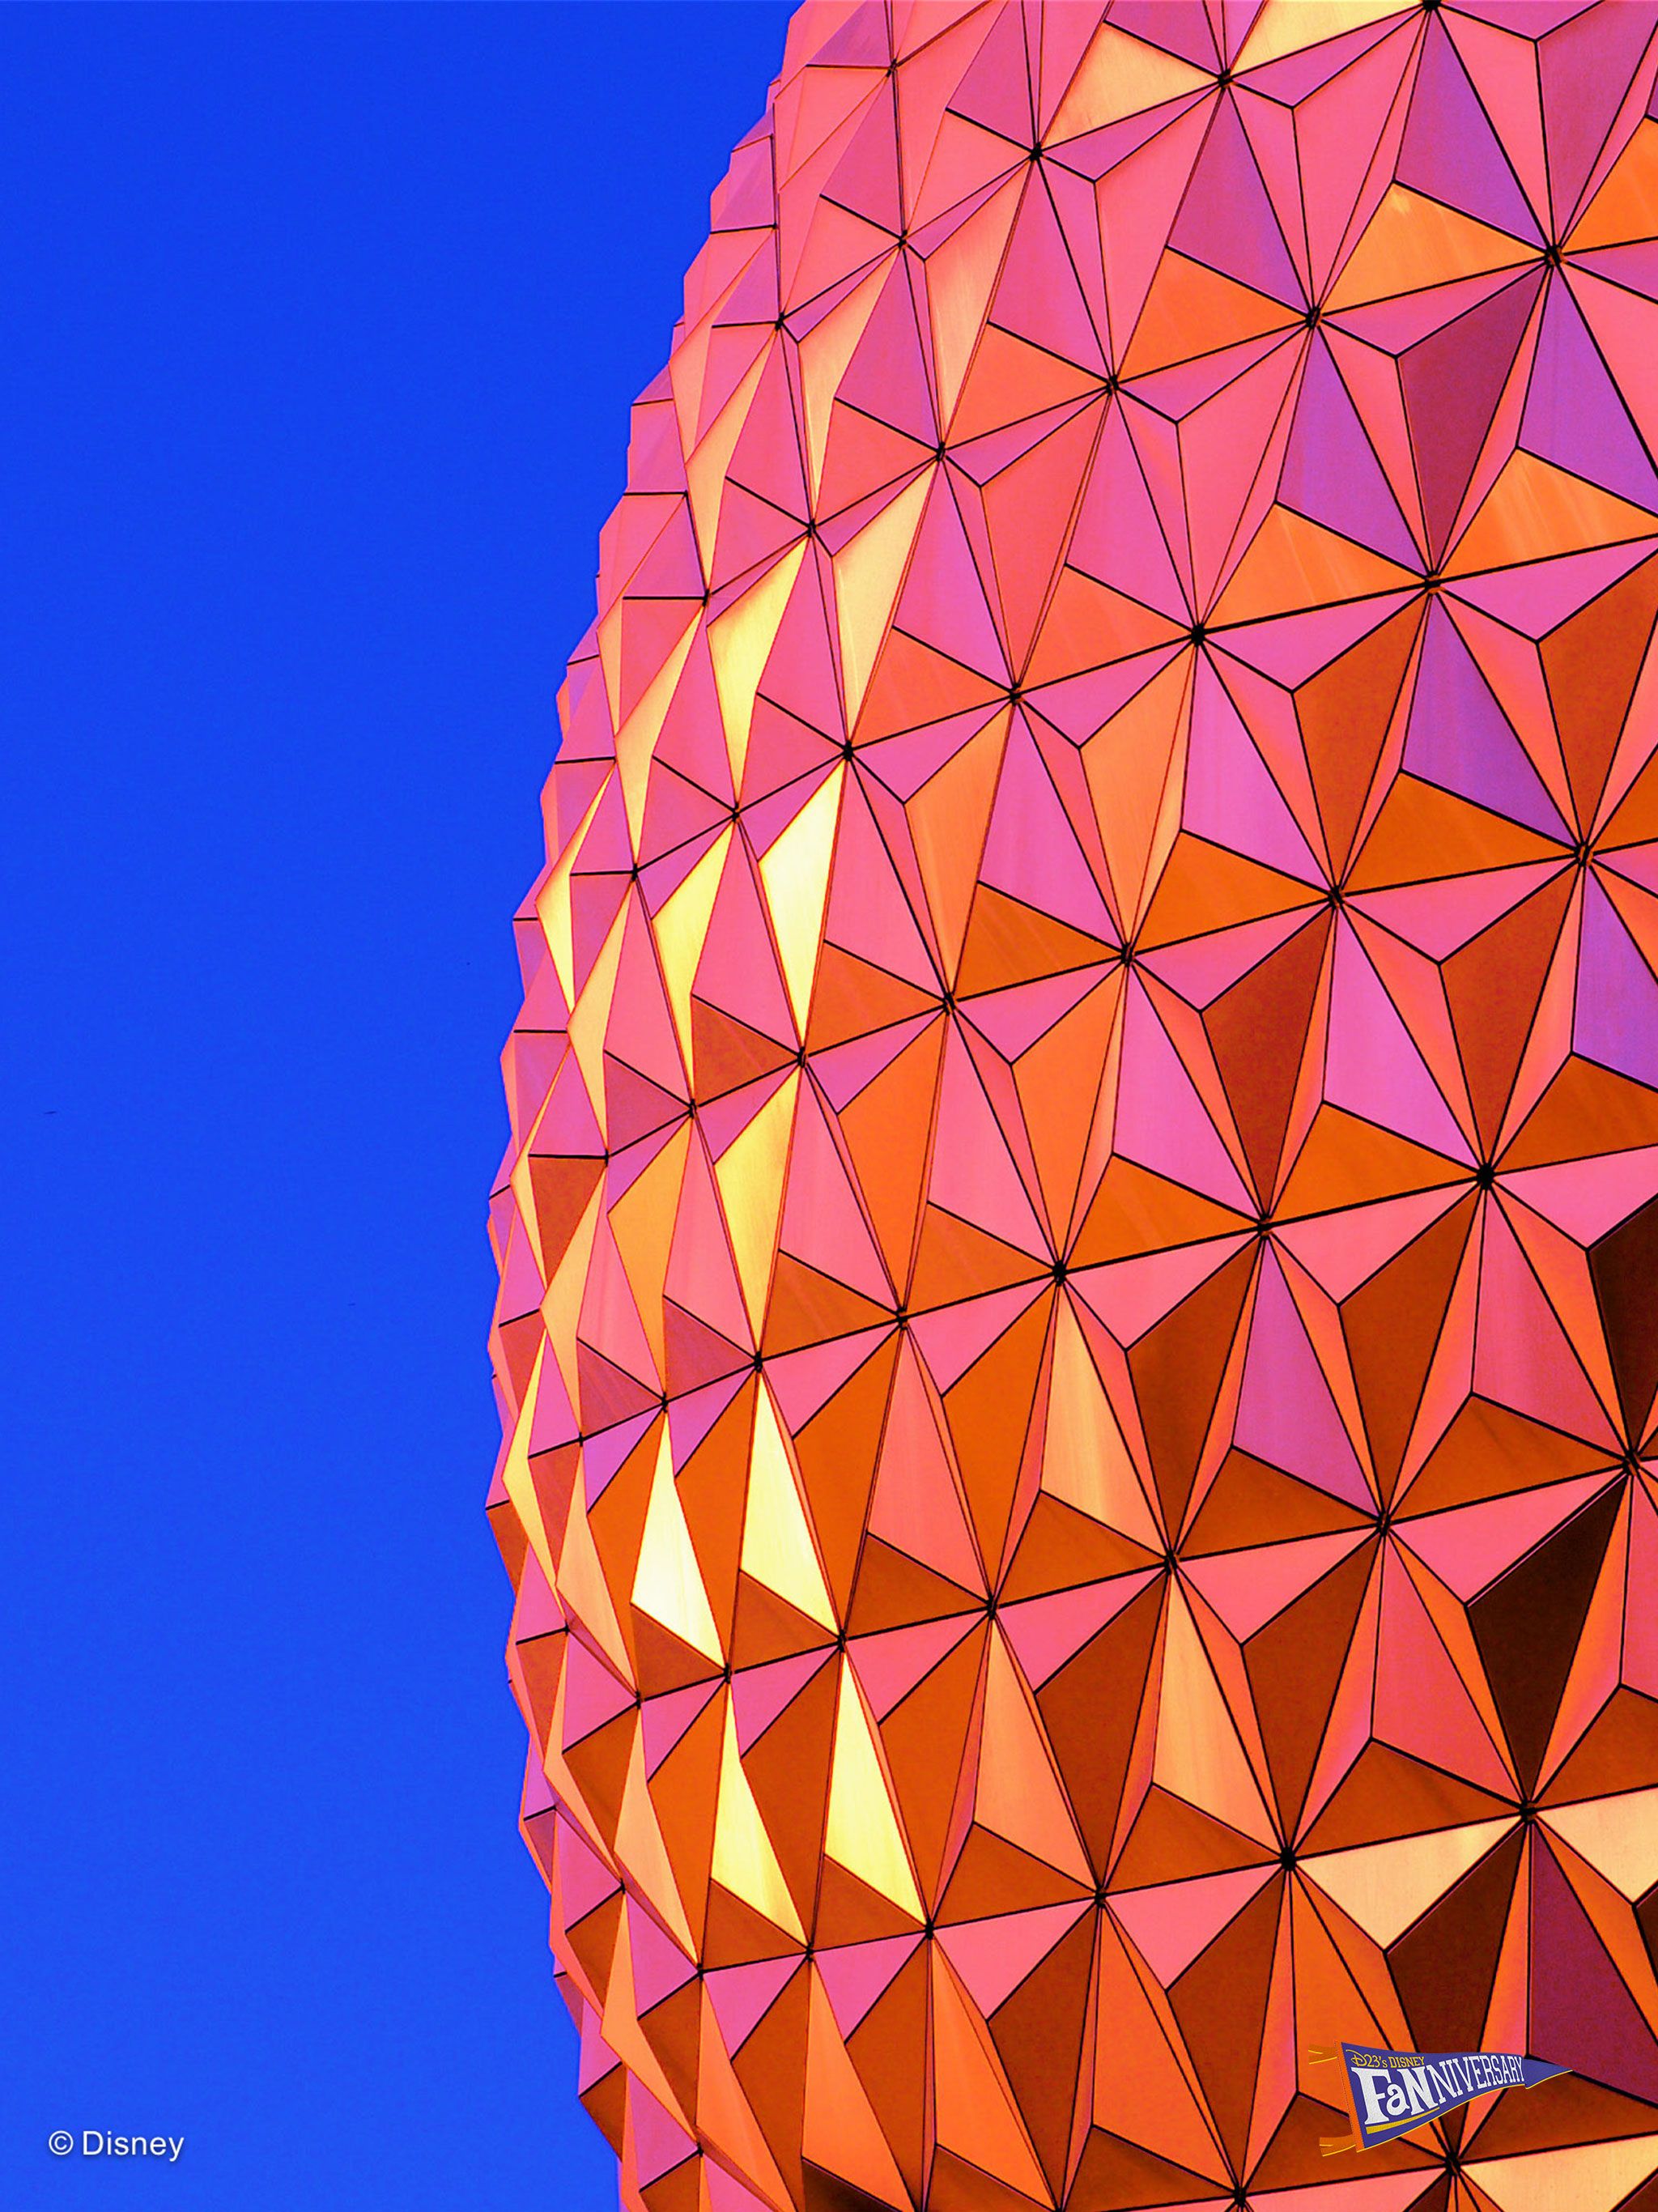 Dreamy Epcot Wallpaper for your Phone (or Desktop or Tablet!)